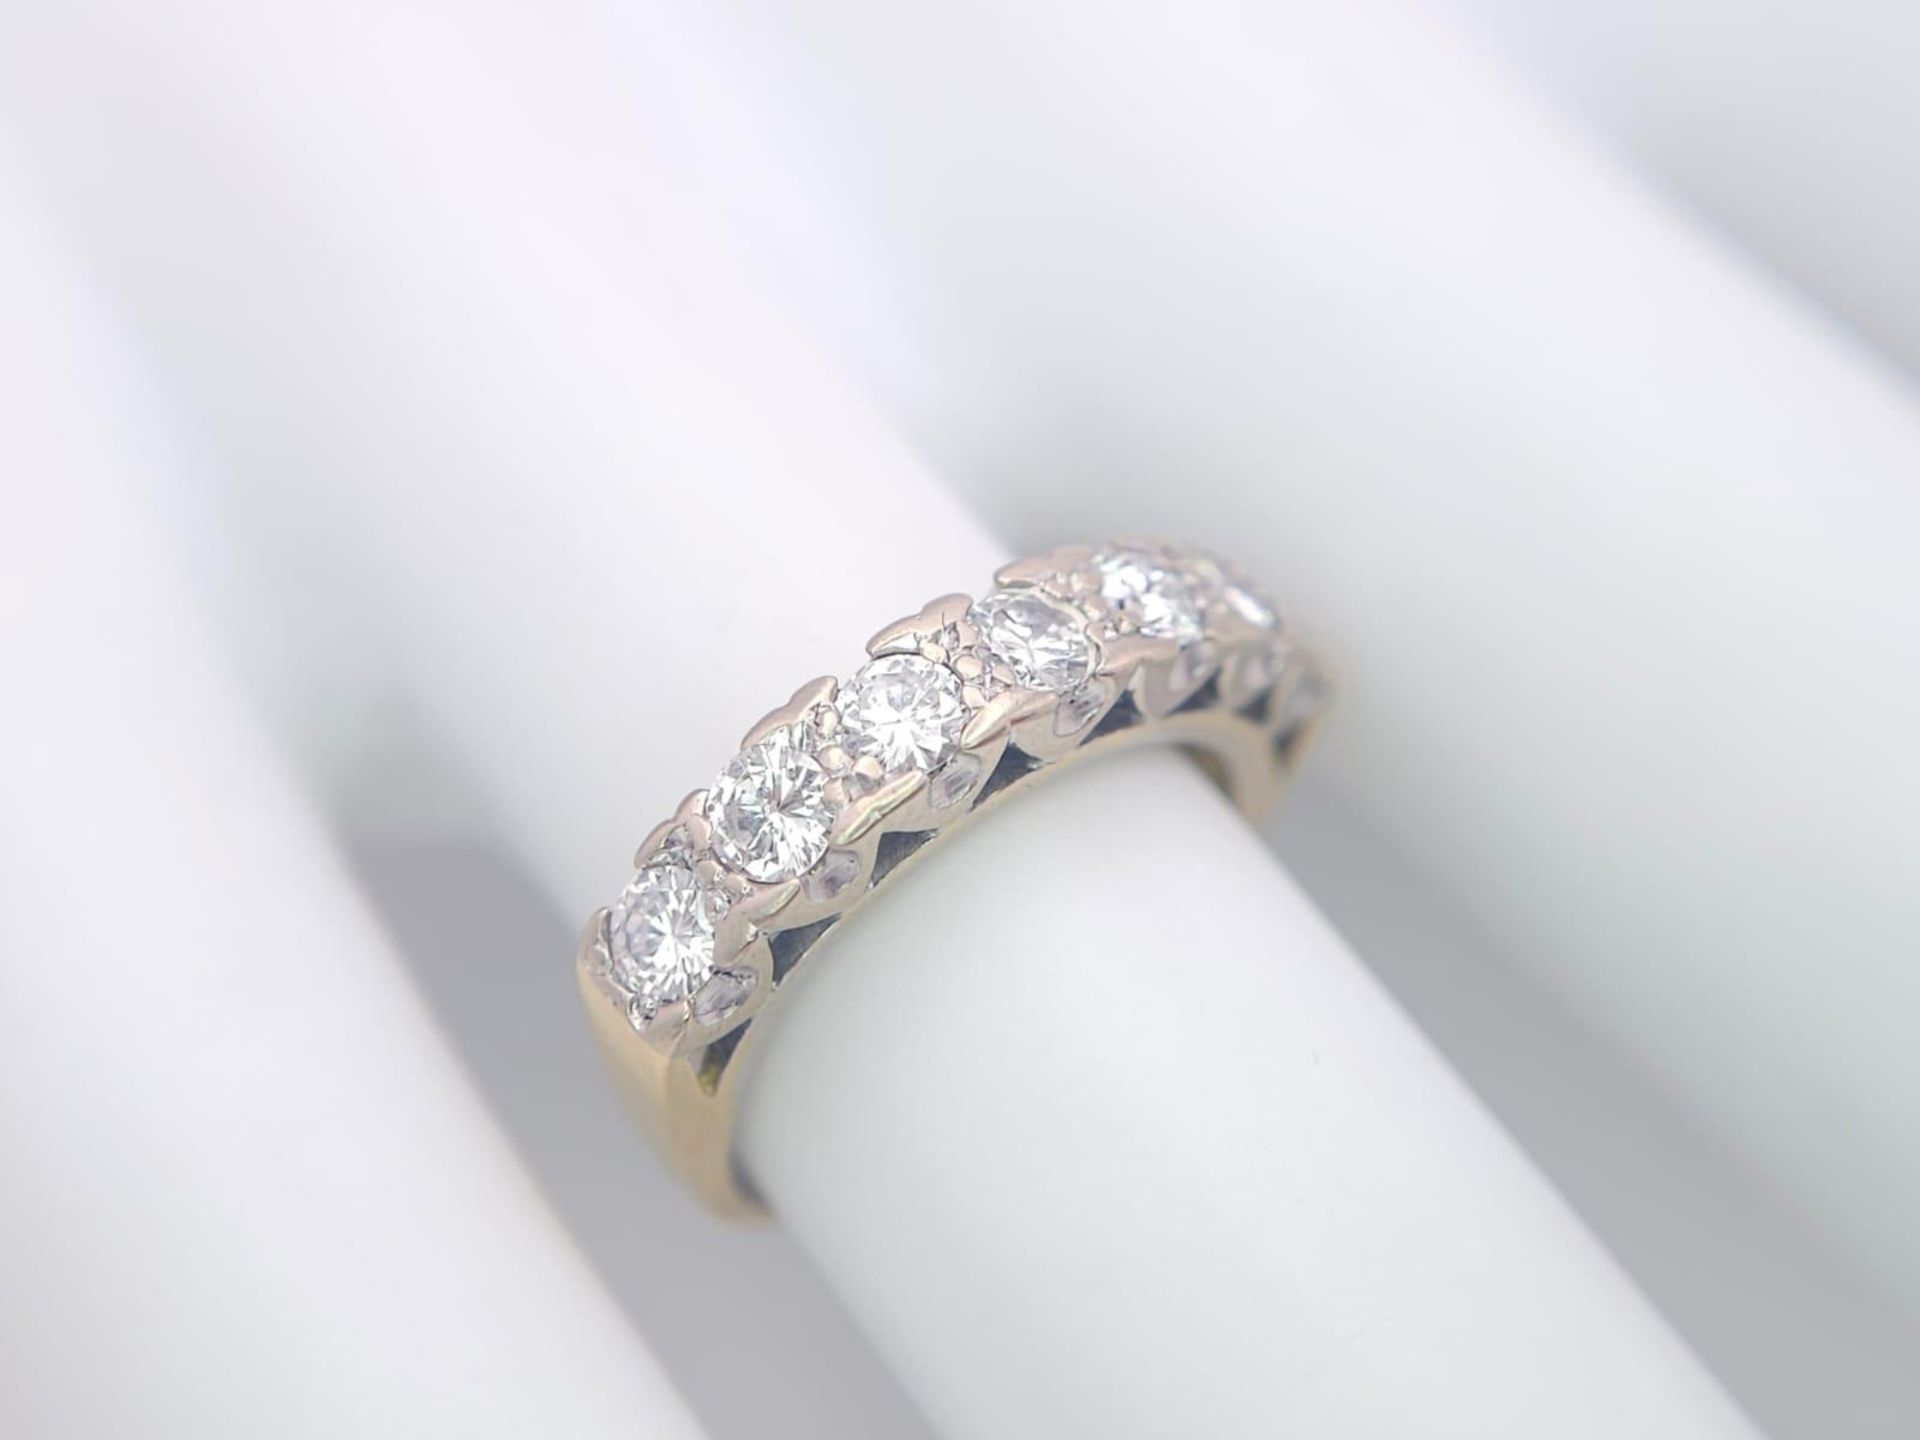 An 18K Yellow Gold Diamond Half Eternity Ring. 0.70ctw, Size J1/2, 3.6g total weight. Ref: 8451 - Image 7 of 7